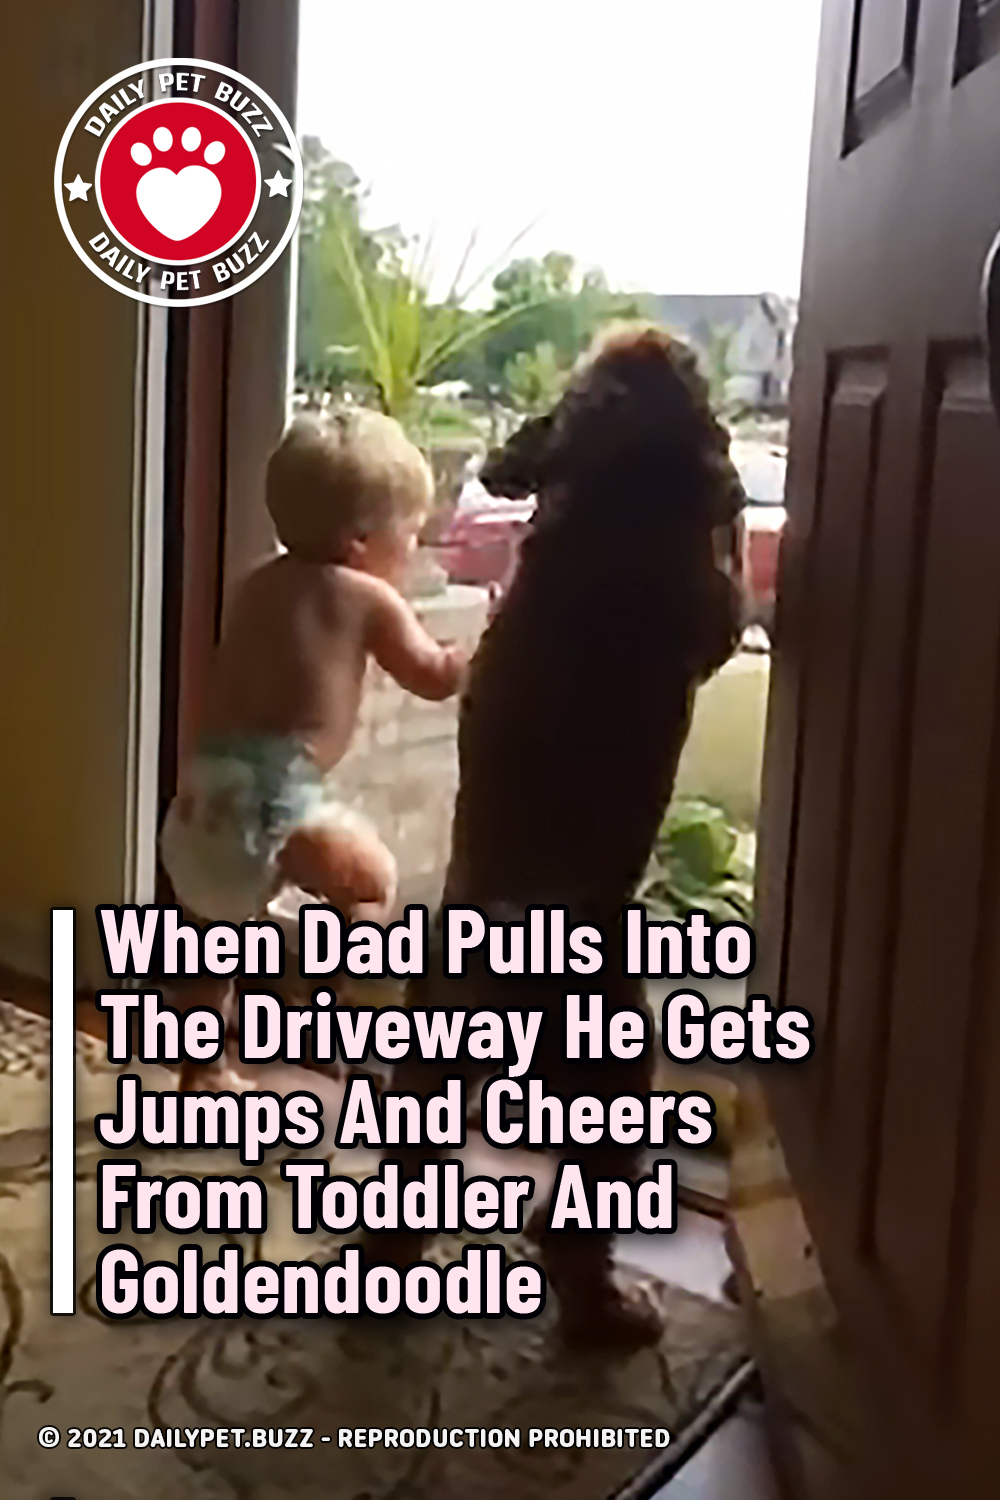 When Dad Pulls Into The Driveway He Gets Jumps And Cheers From Toddler And Goldendoodle